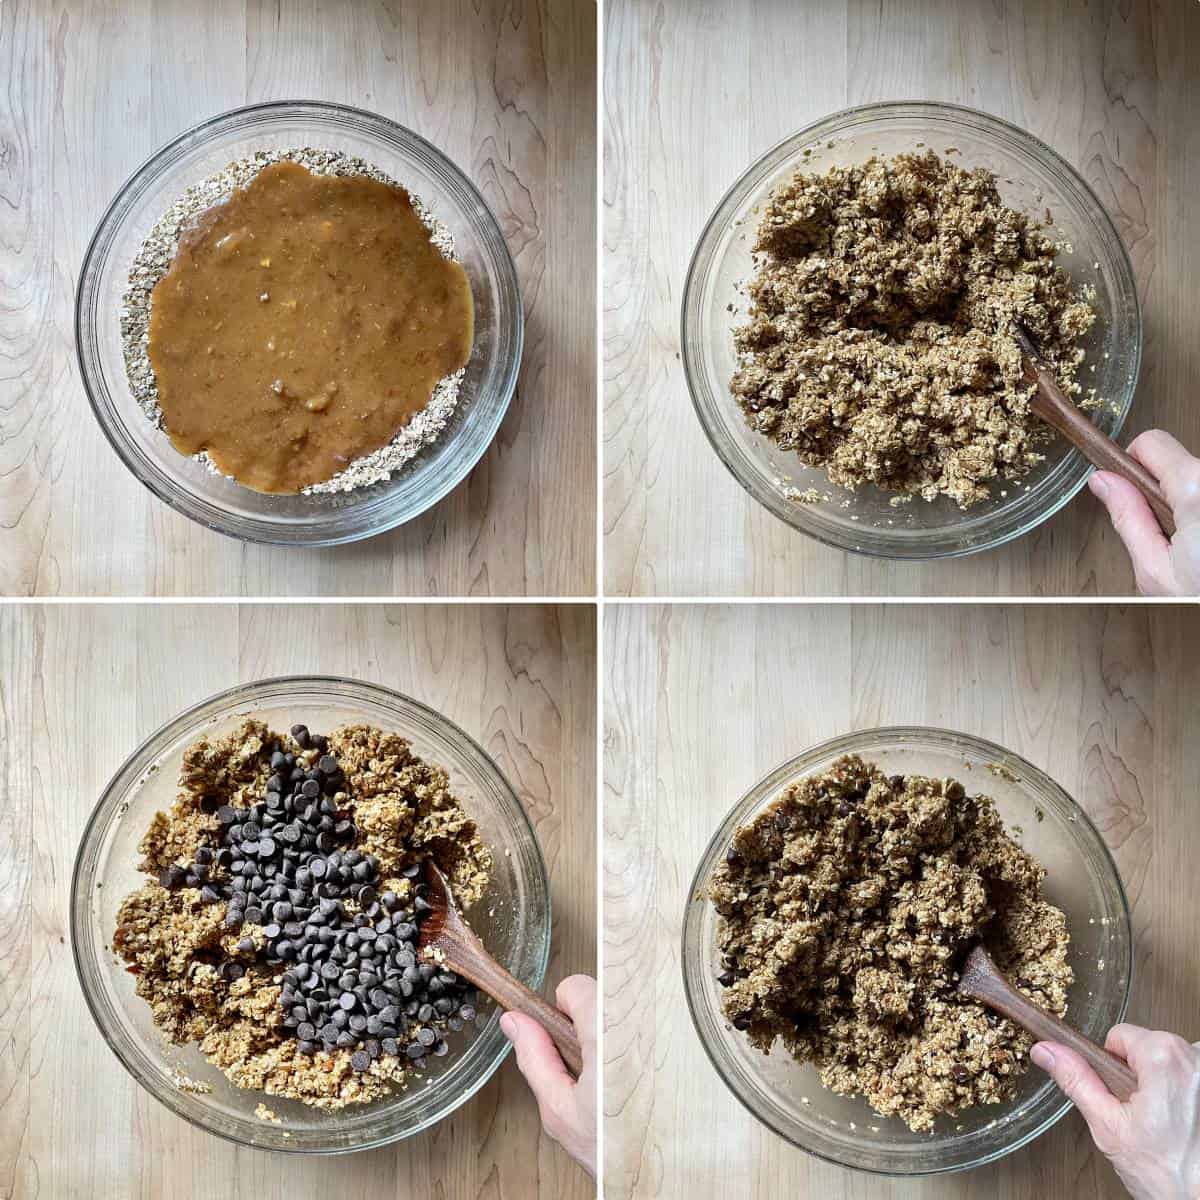 A photo collage of how to combine the ingredients to make homemade granola bars.